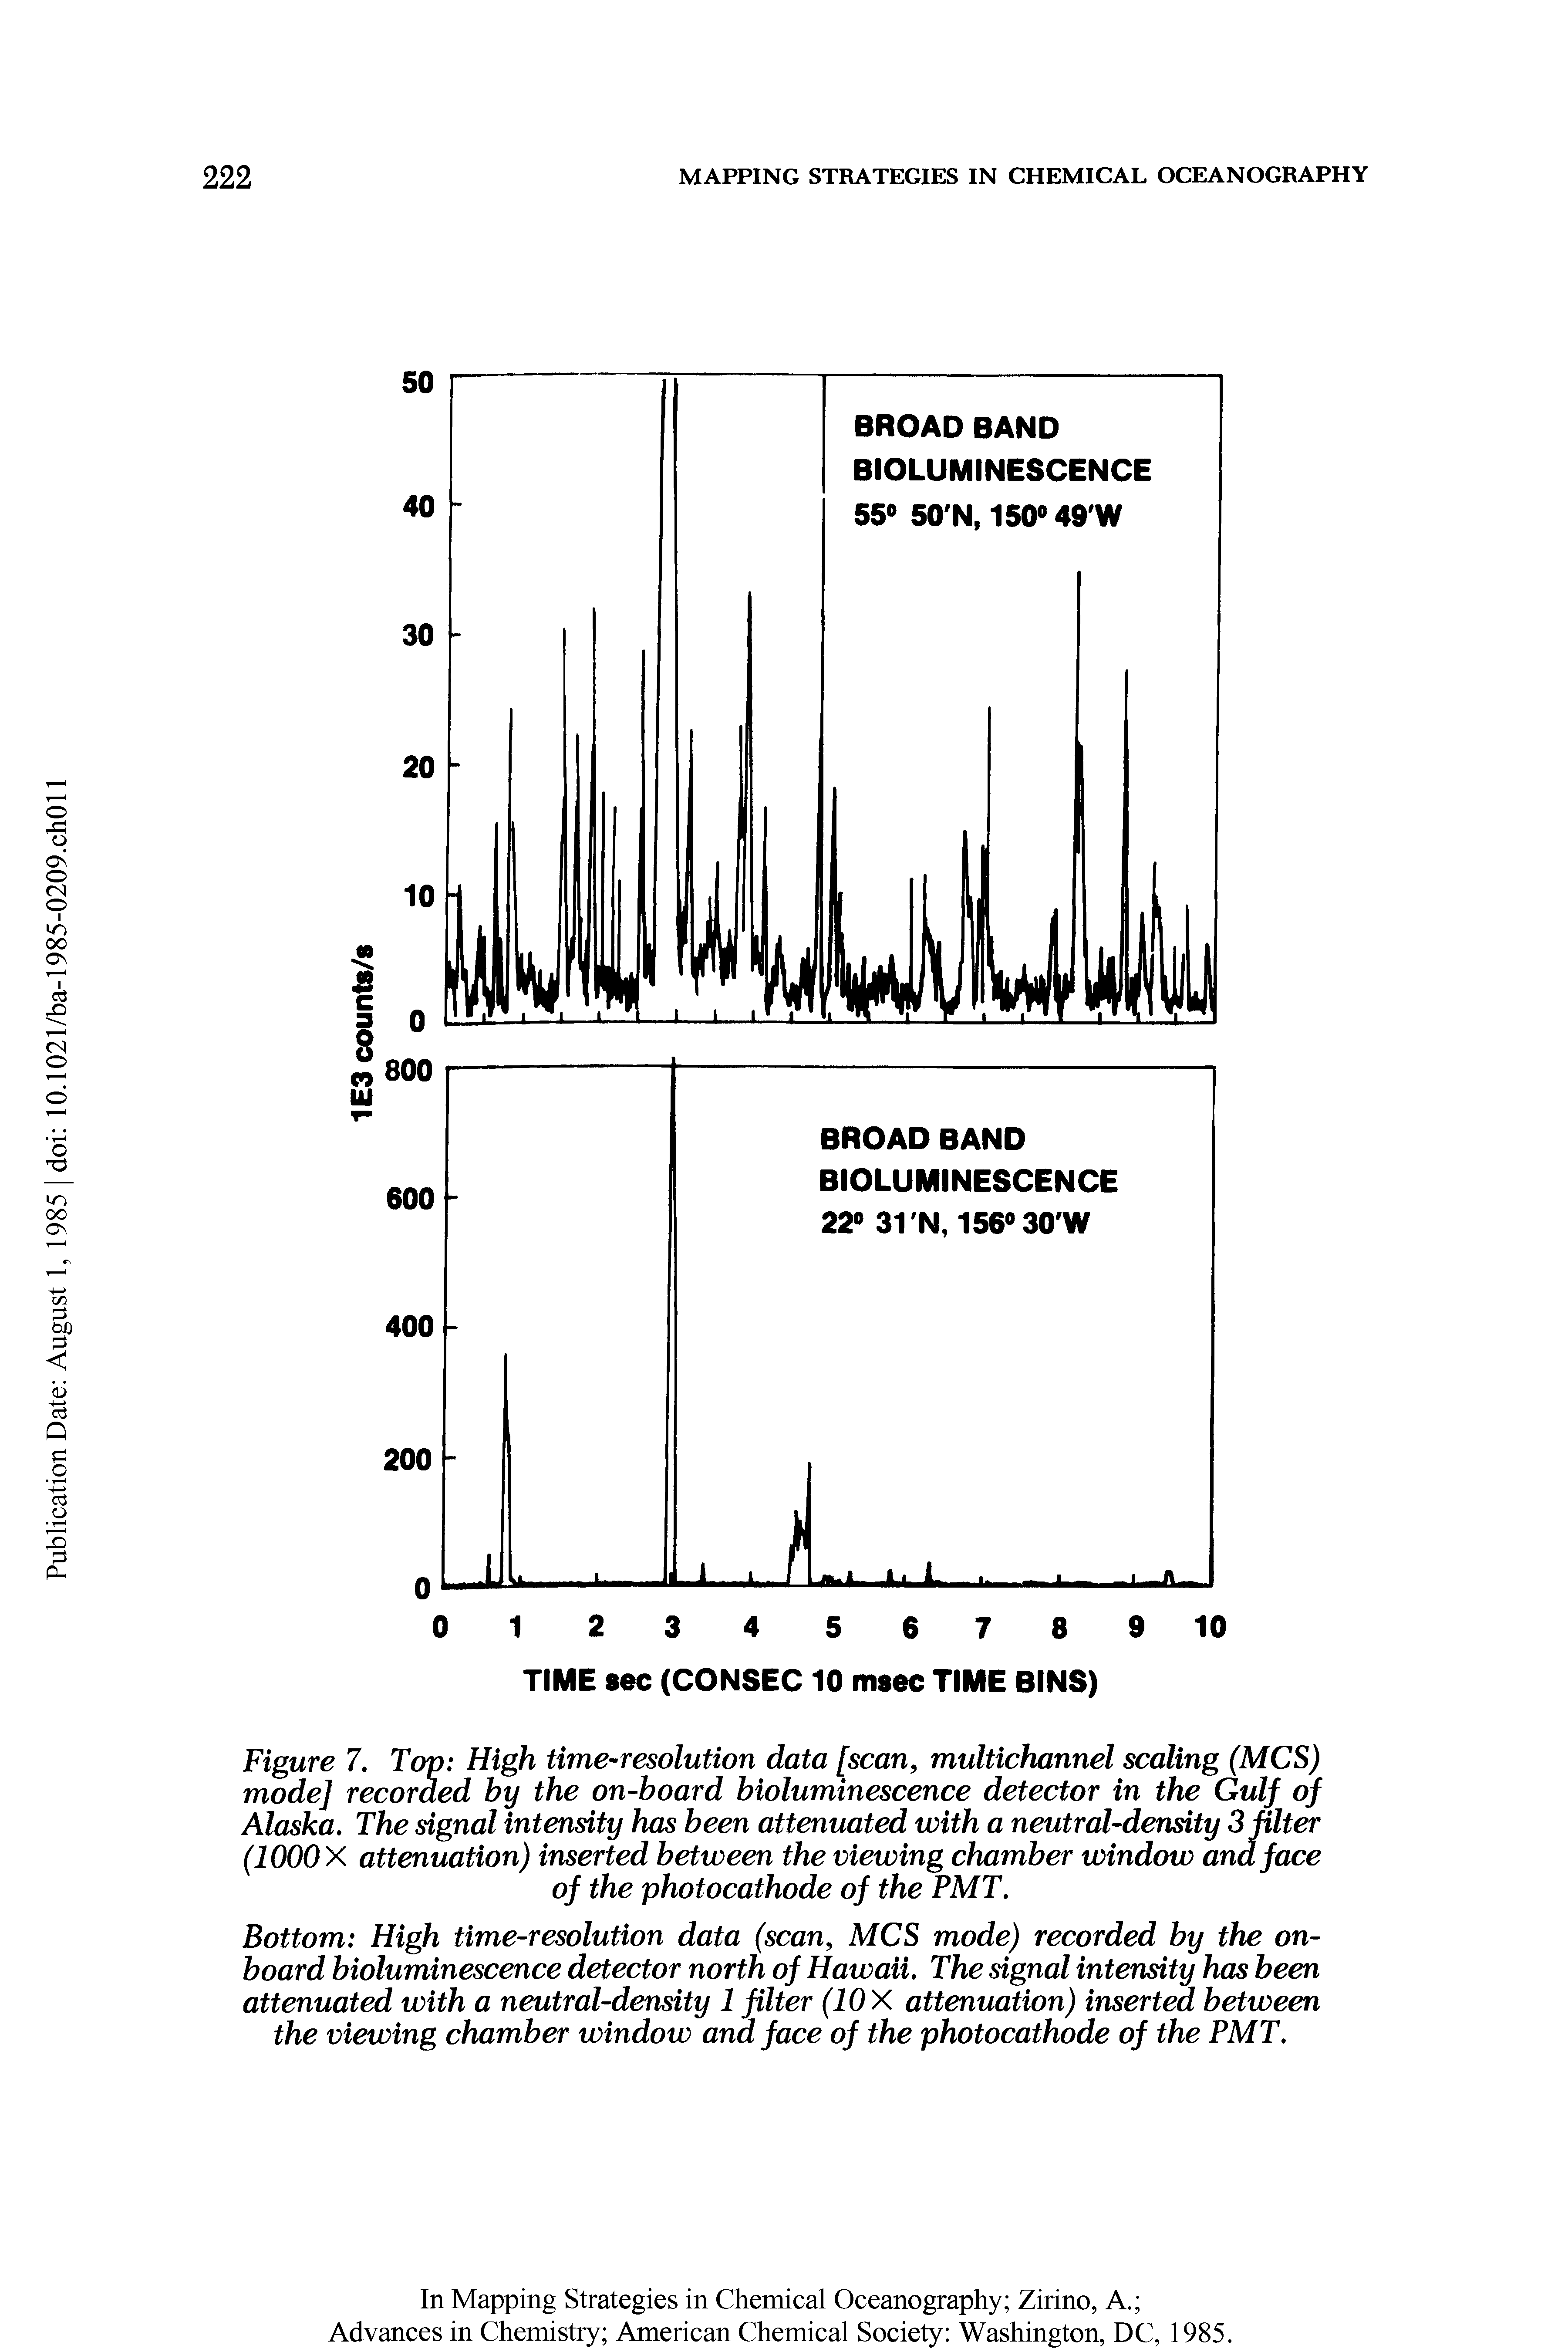 Figure 1, Top High time-resolution data [scan, multichannel scaling (MCS) mode] recorded by the on-hoard bioluminescence detector in the Gulf of Alaska. The signal intensity has been attenuated with a neutral-density 3 filter (1000 X attenuation) inserted between the viewing chamber window and face of the photocathode of the PMT.